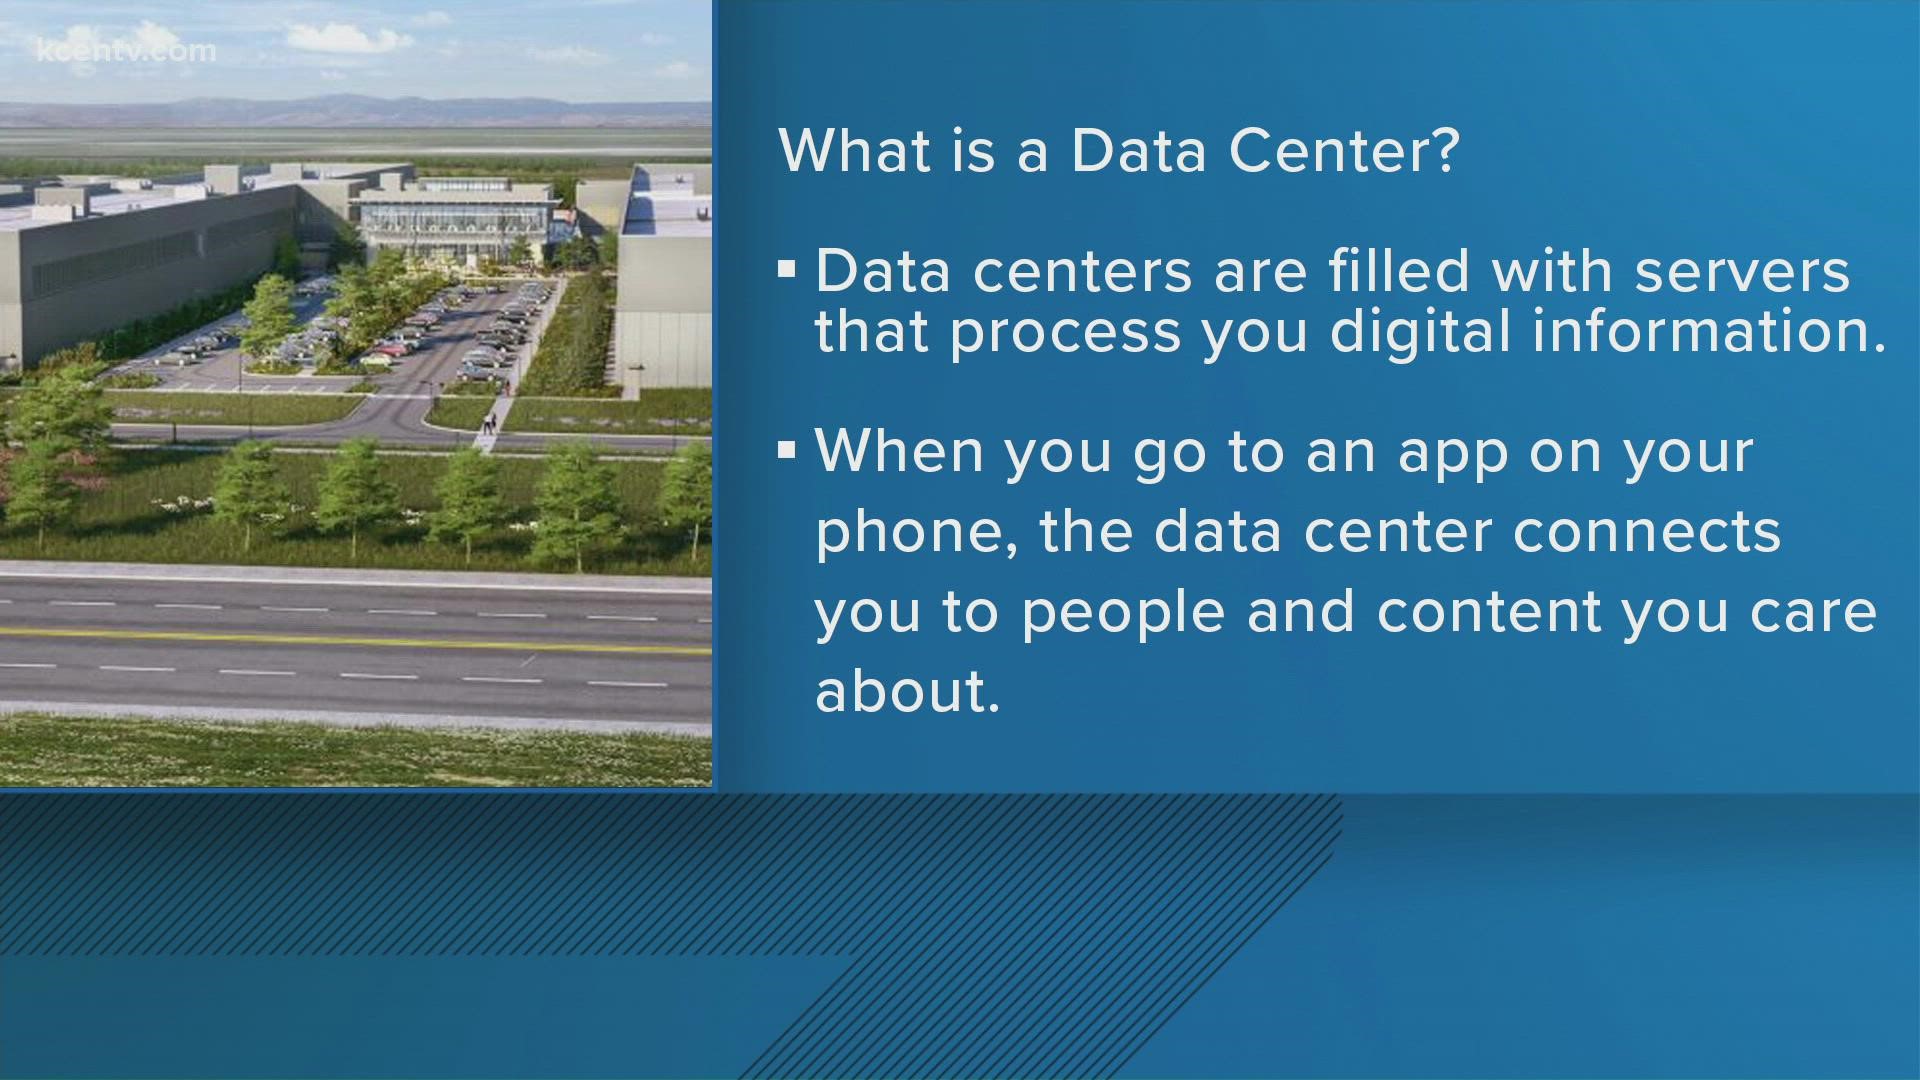 Data Centers help local communities thrive, here's how.